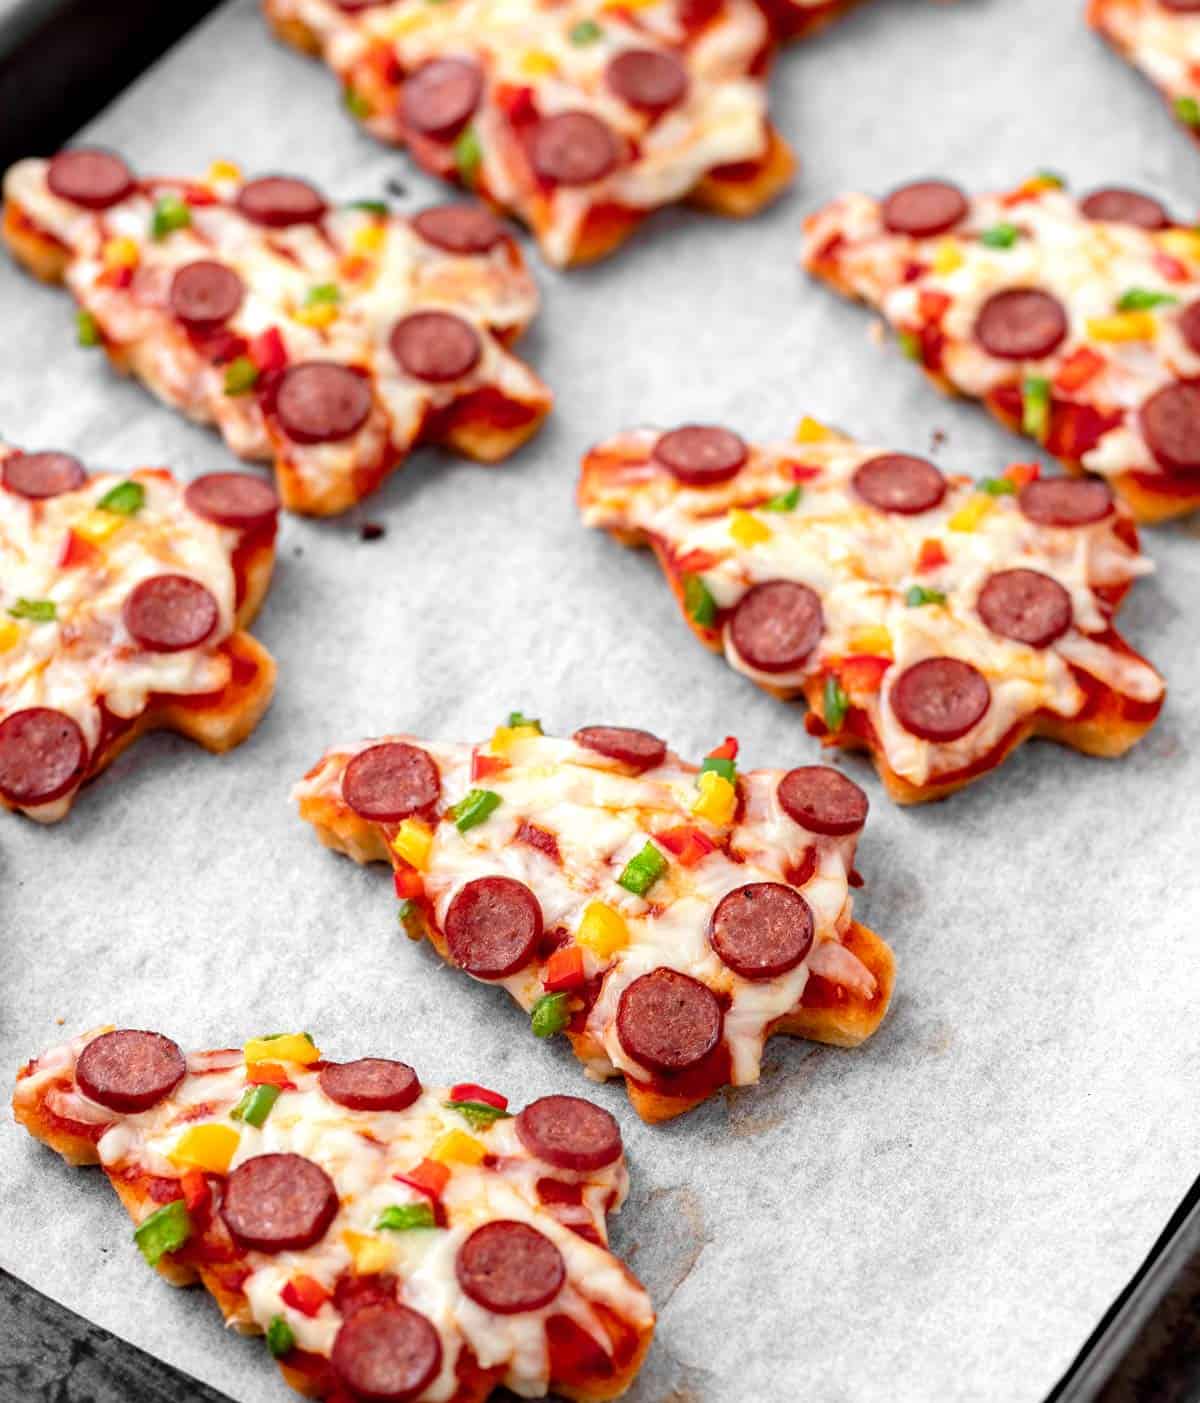 The mini Christmas tree pizzas on a baking sheet after they have cooked in the oven.